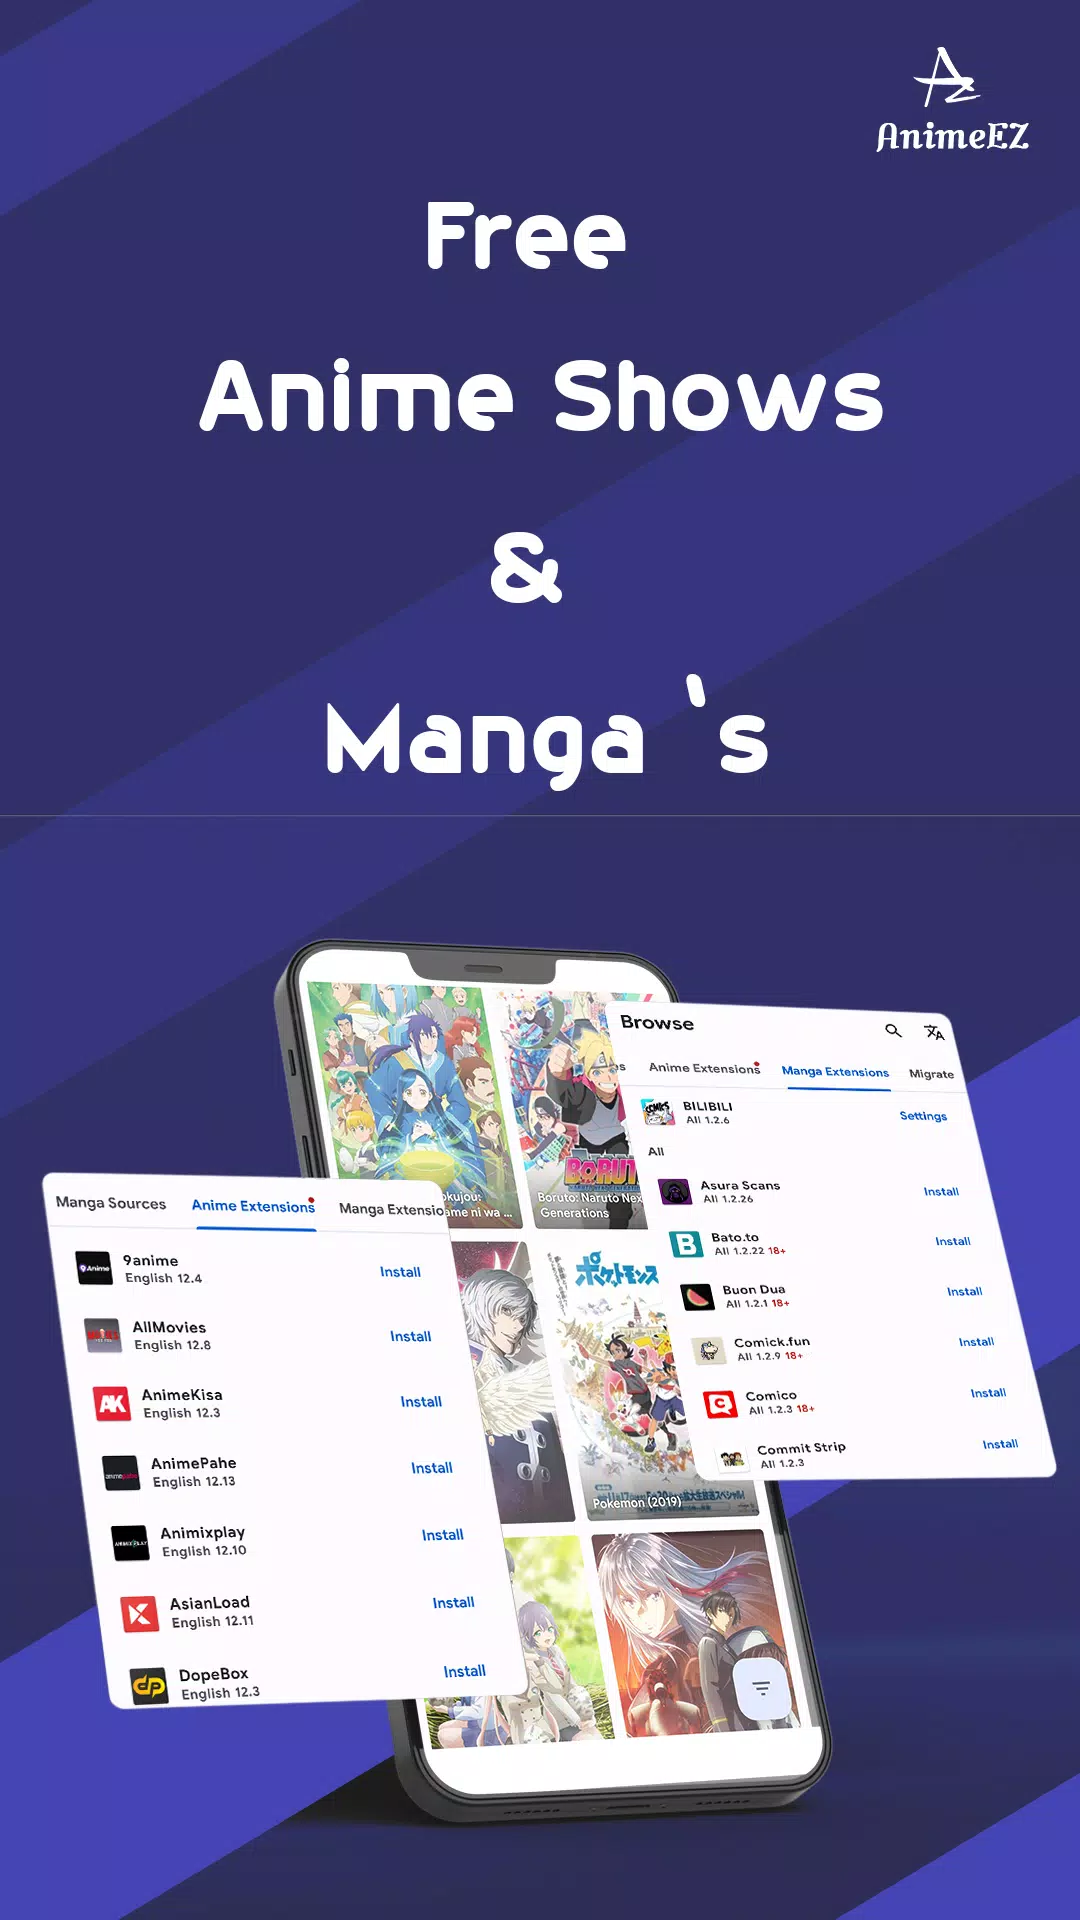 Animes Online APK (Android App) - Free Download